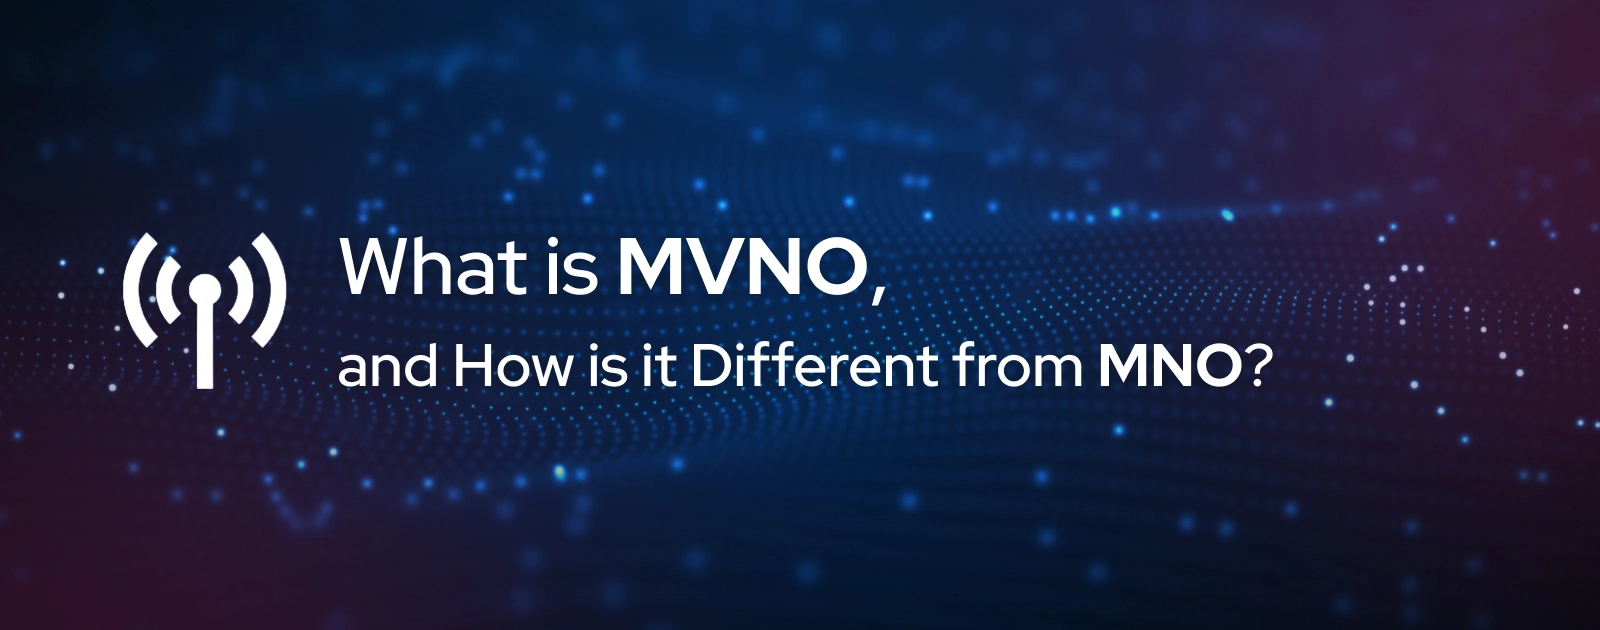 What is MVNO